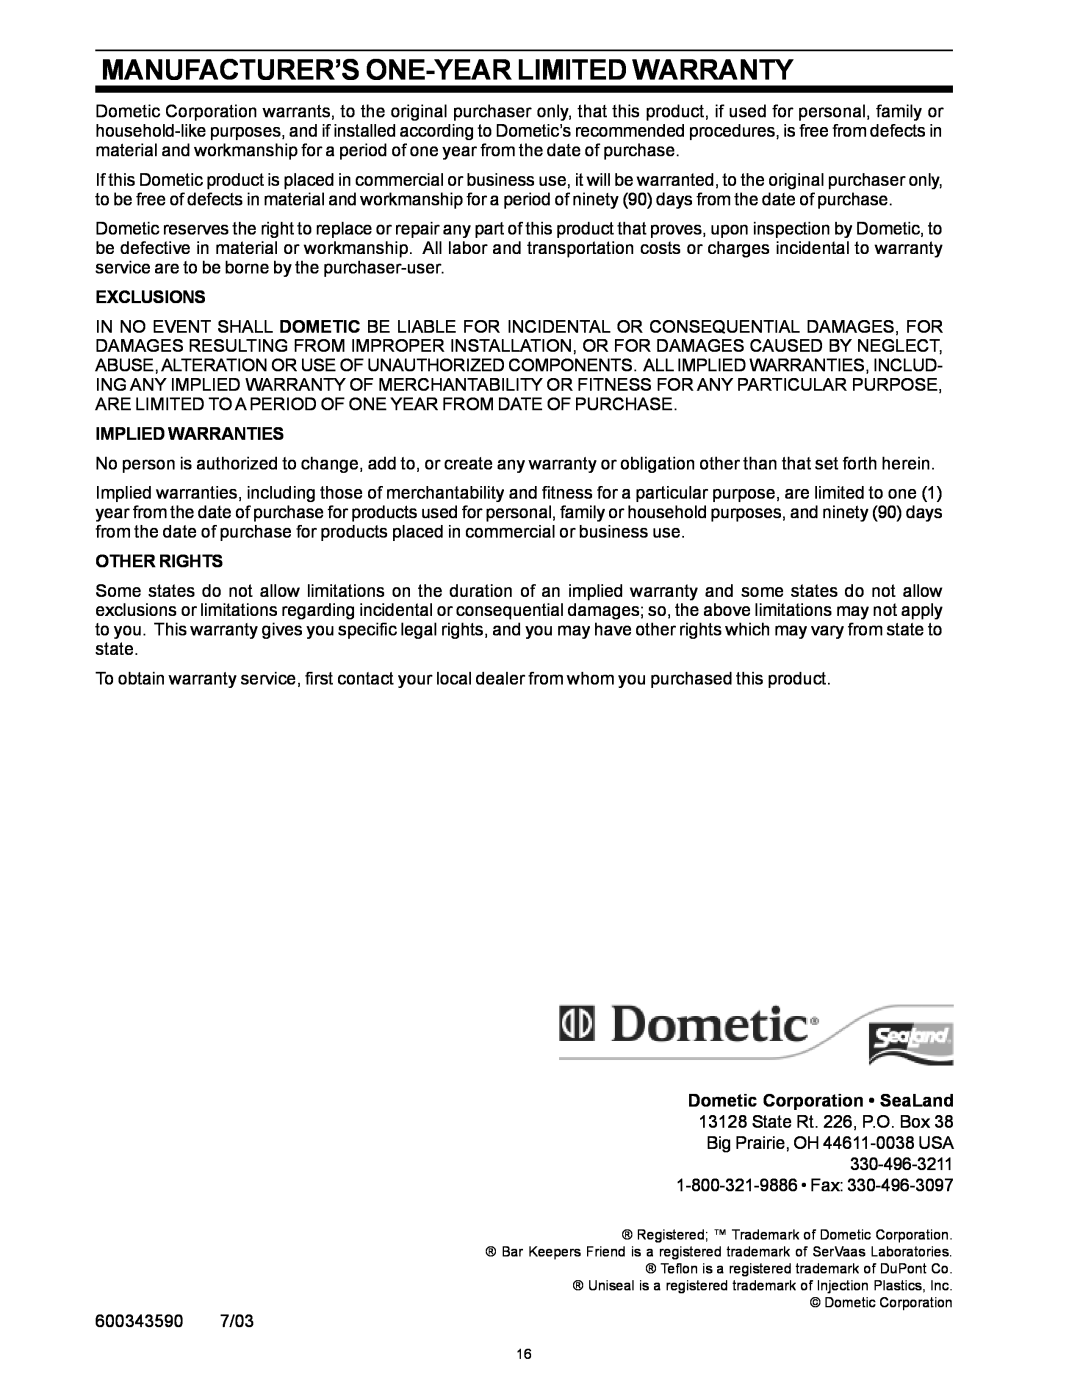 Dometic SANITATION SYSTEM Manufacturer’S One-Yearlimited Warranty, Exclusions, Implied Warranties, Other Rights 